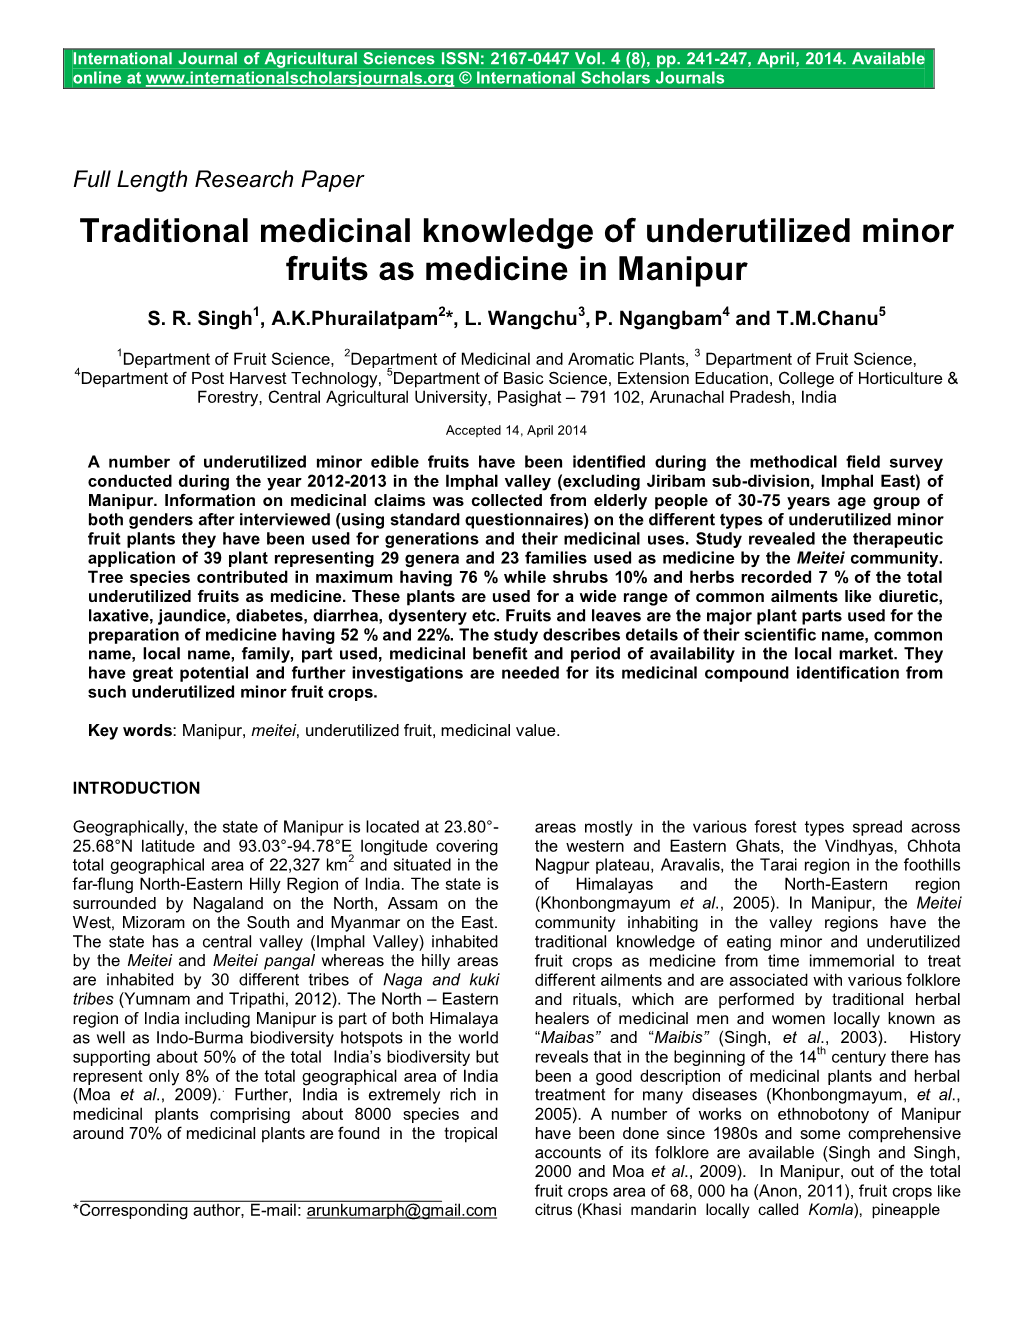 Traditional Medicinal Knowledge of Underutilized Minor Fruits As Medicine in Manipur